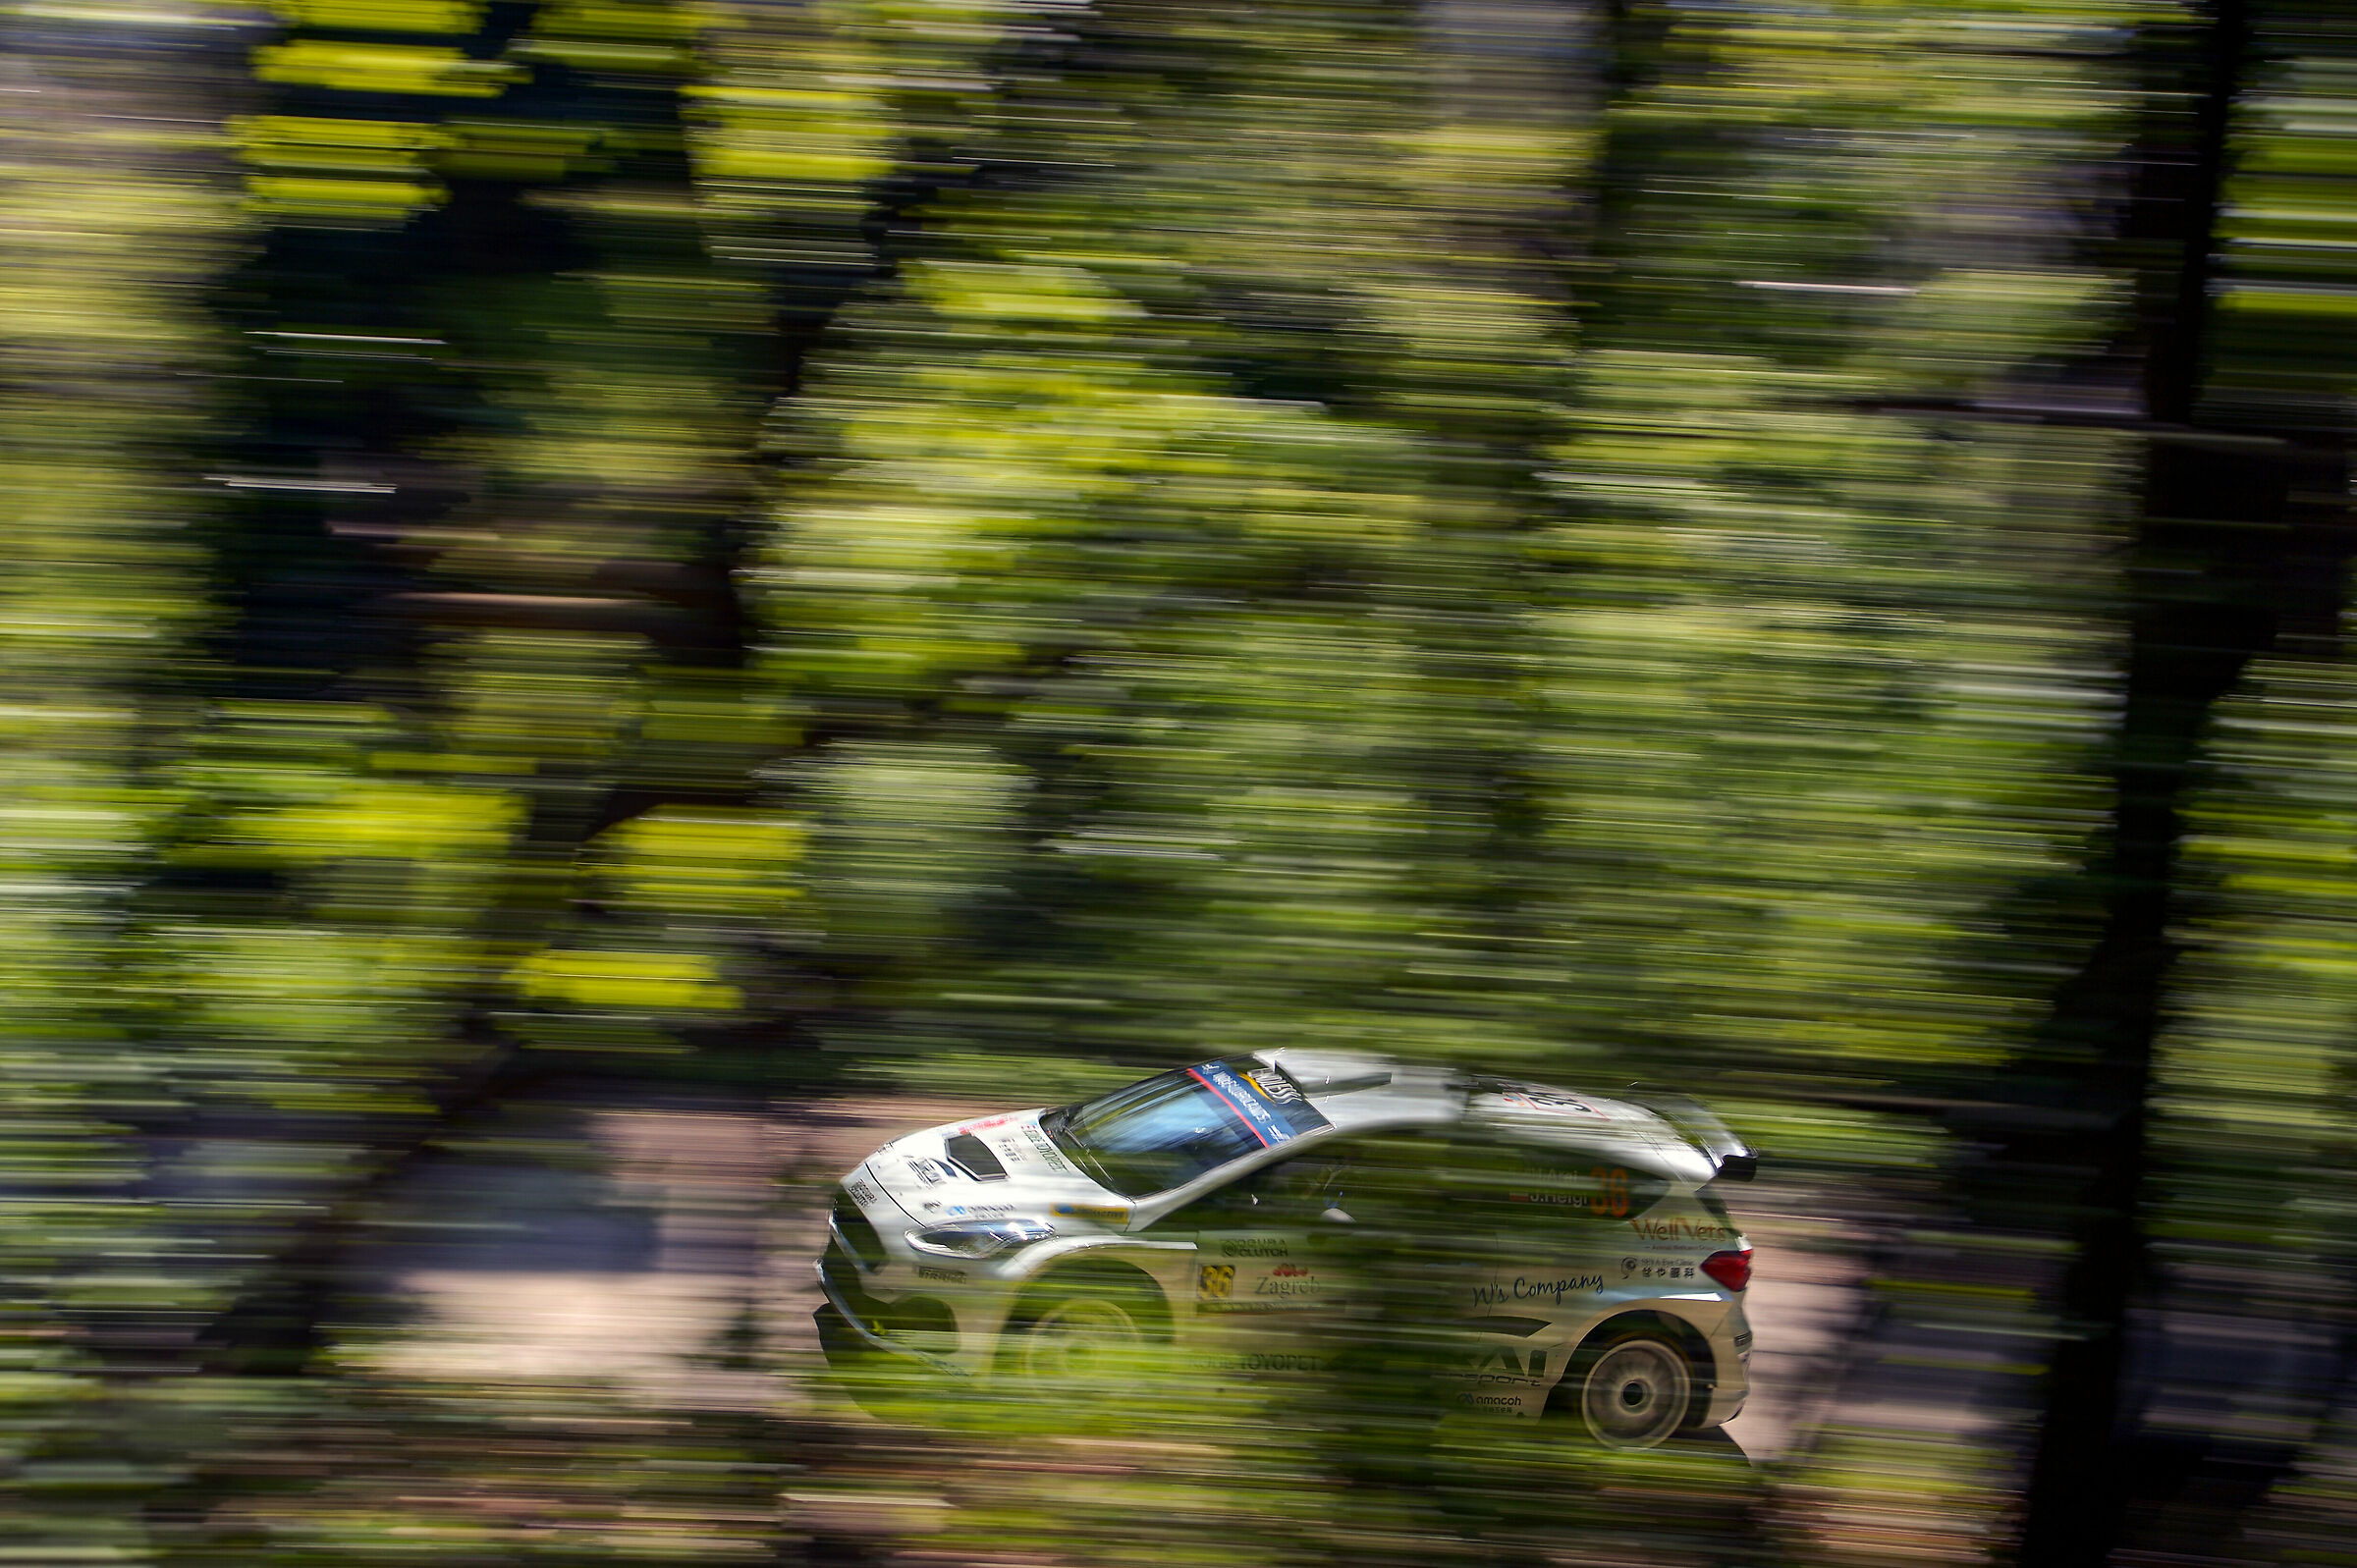 Panning through the leaves...